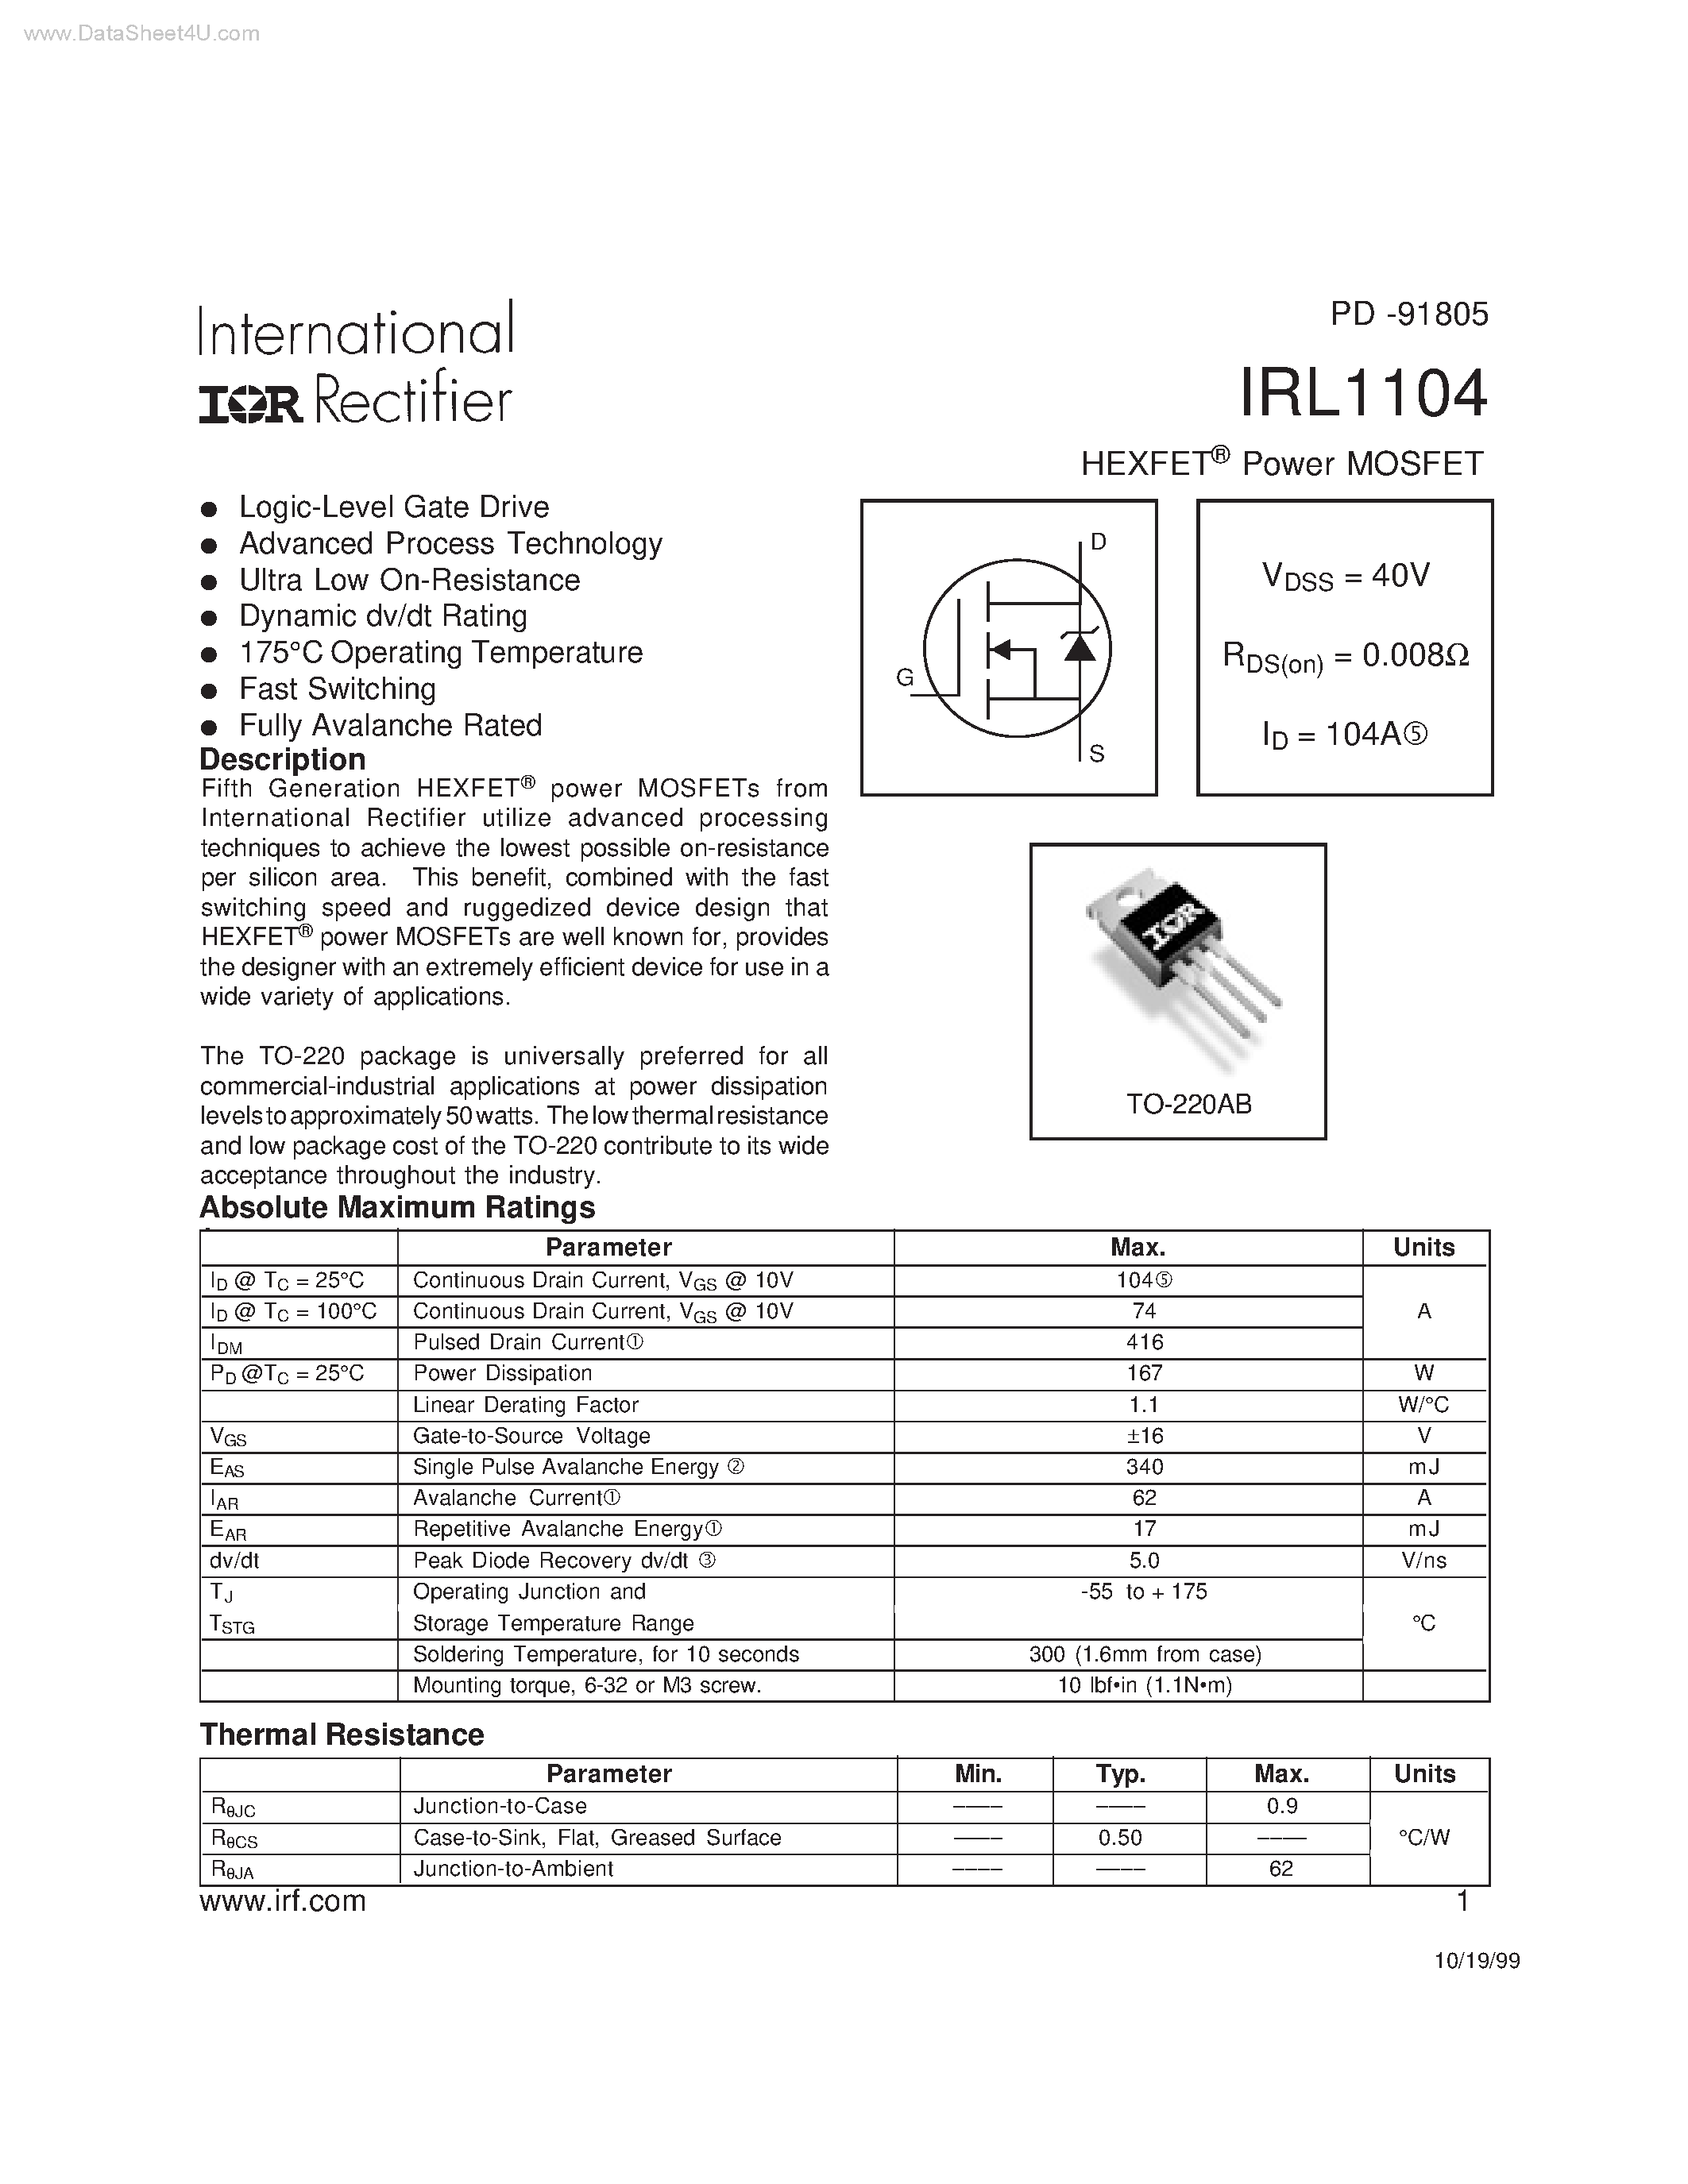 Datasheet IRL1104 - HEXFET Power MOSFET page 1